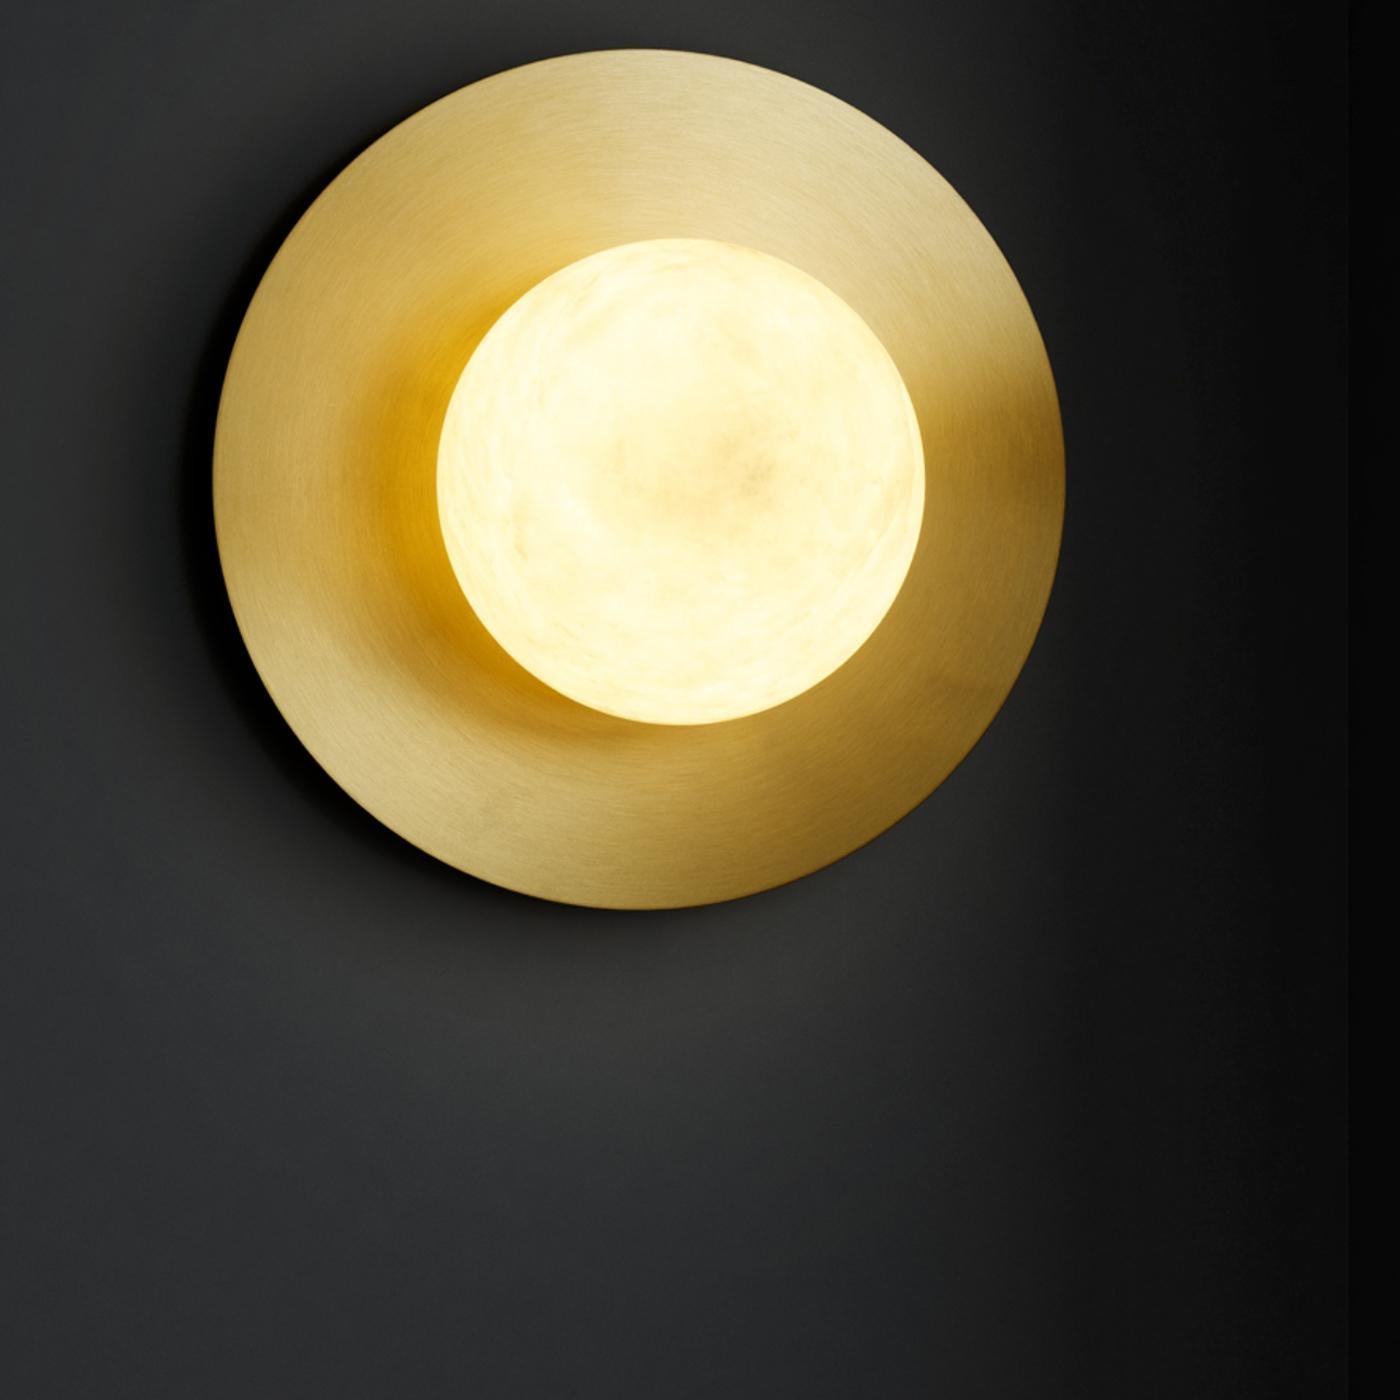 The natural properties of alabaster as a diffuser: warm color and the texture of its veins that are always different from each other, recalling the magic atmosphere of full moon nights. The brass disk completes the shape, enhancing the light emitted